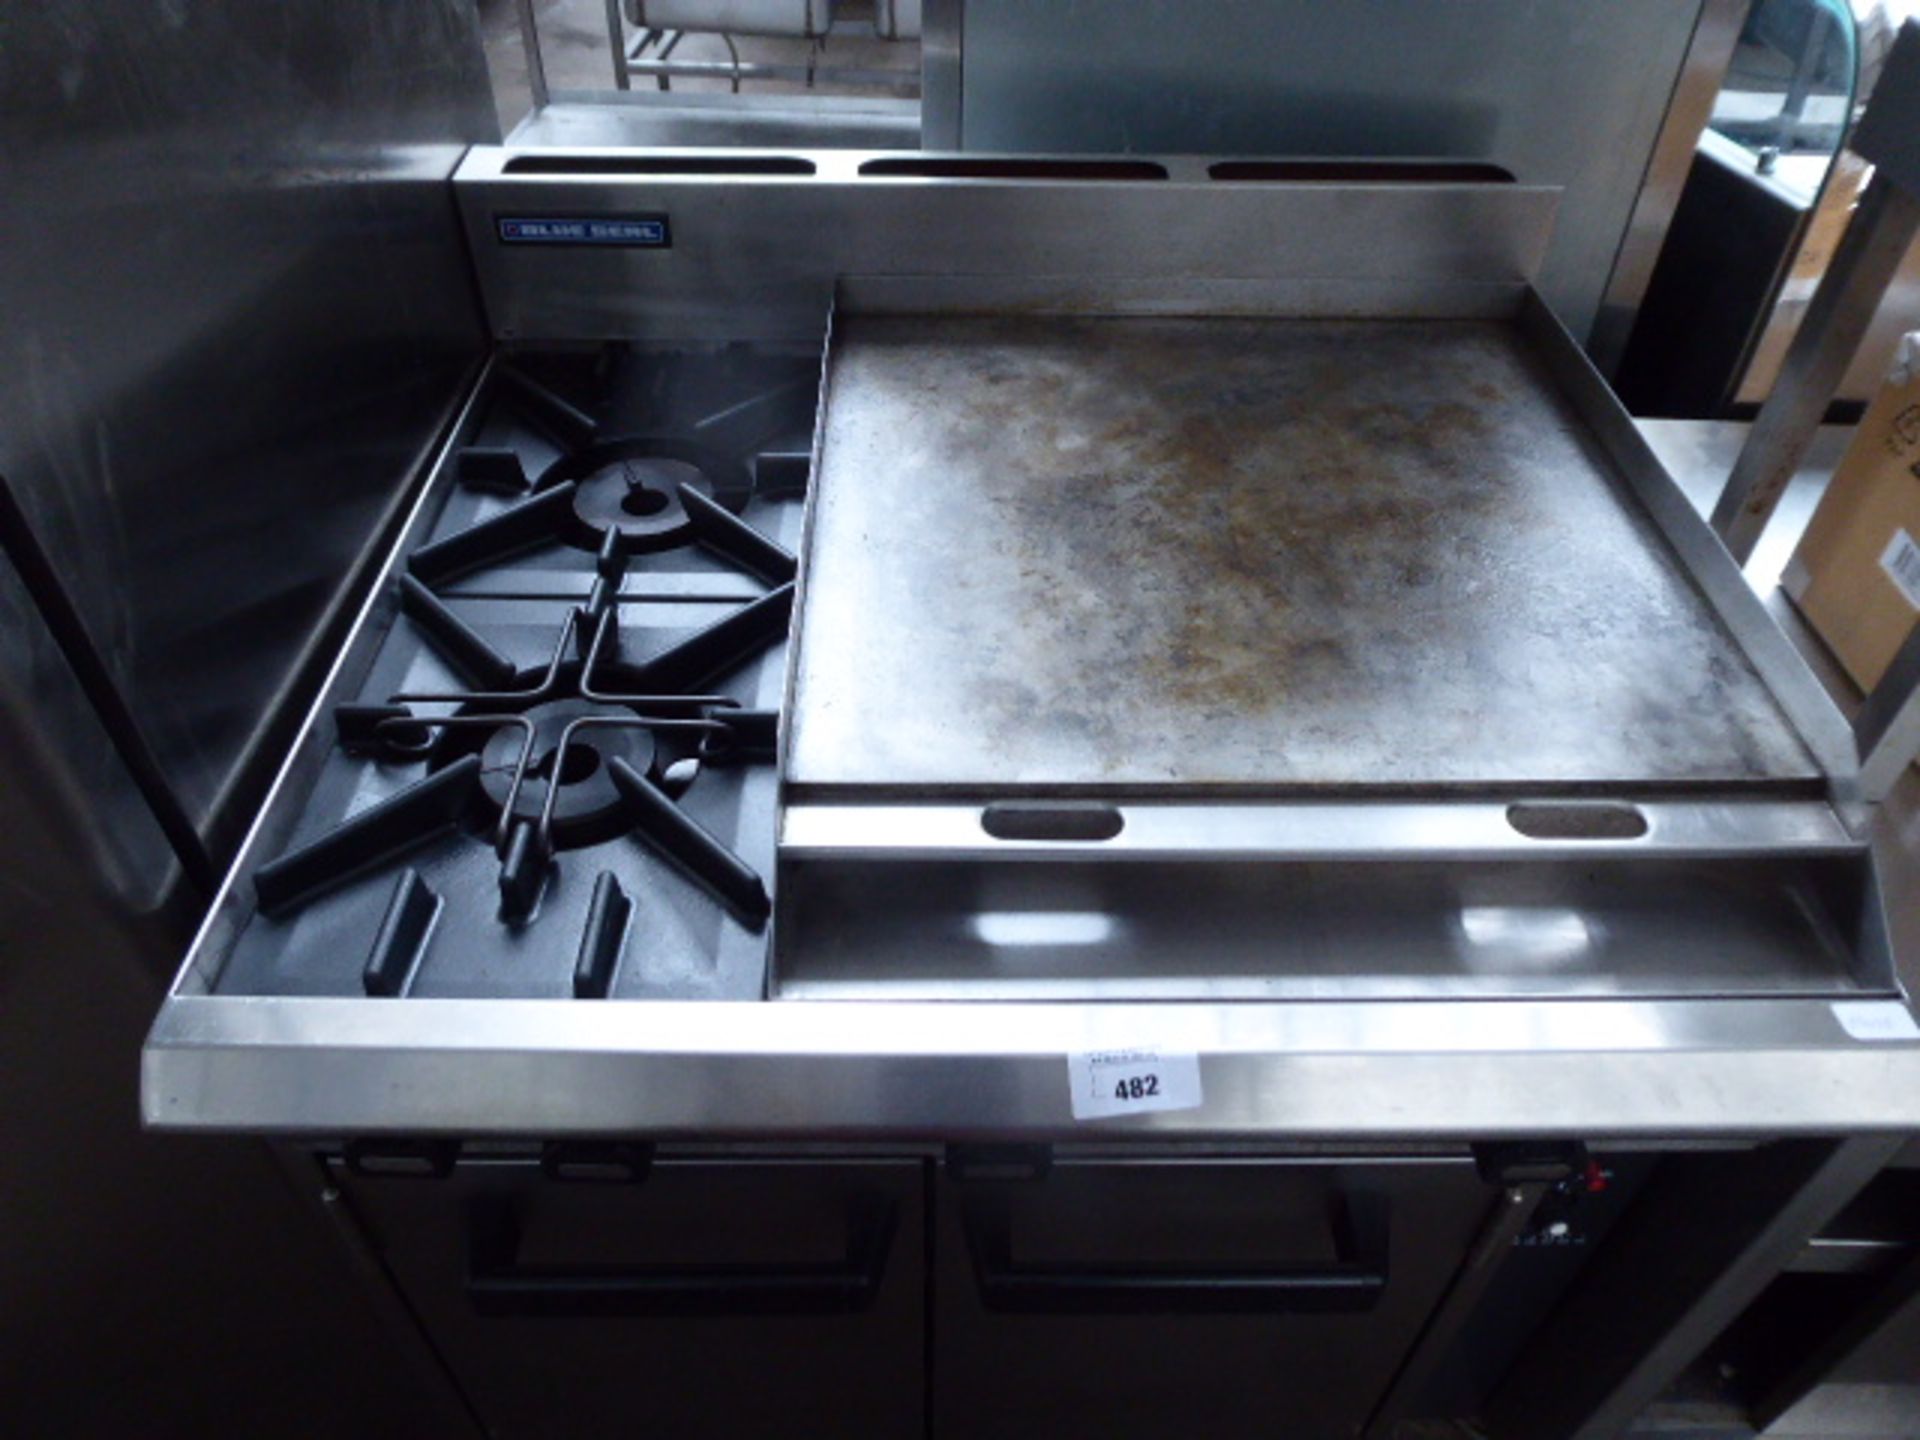 90cm gas Blue Seal solid top griddle and 2 burner cooker with double door oven under - Image 2 of 3